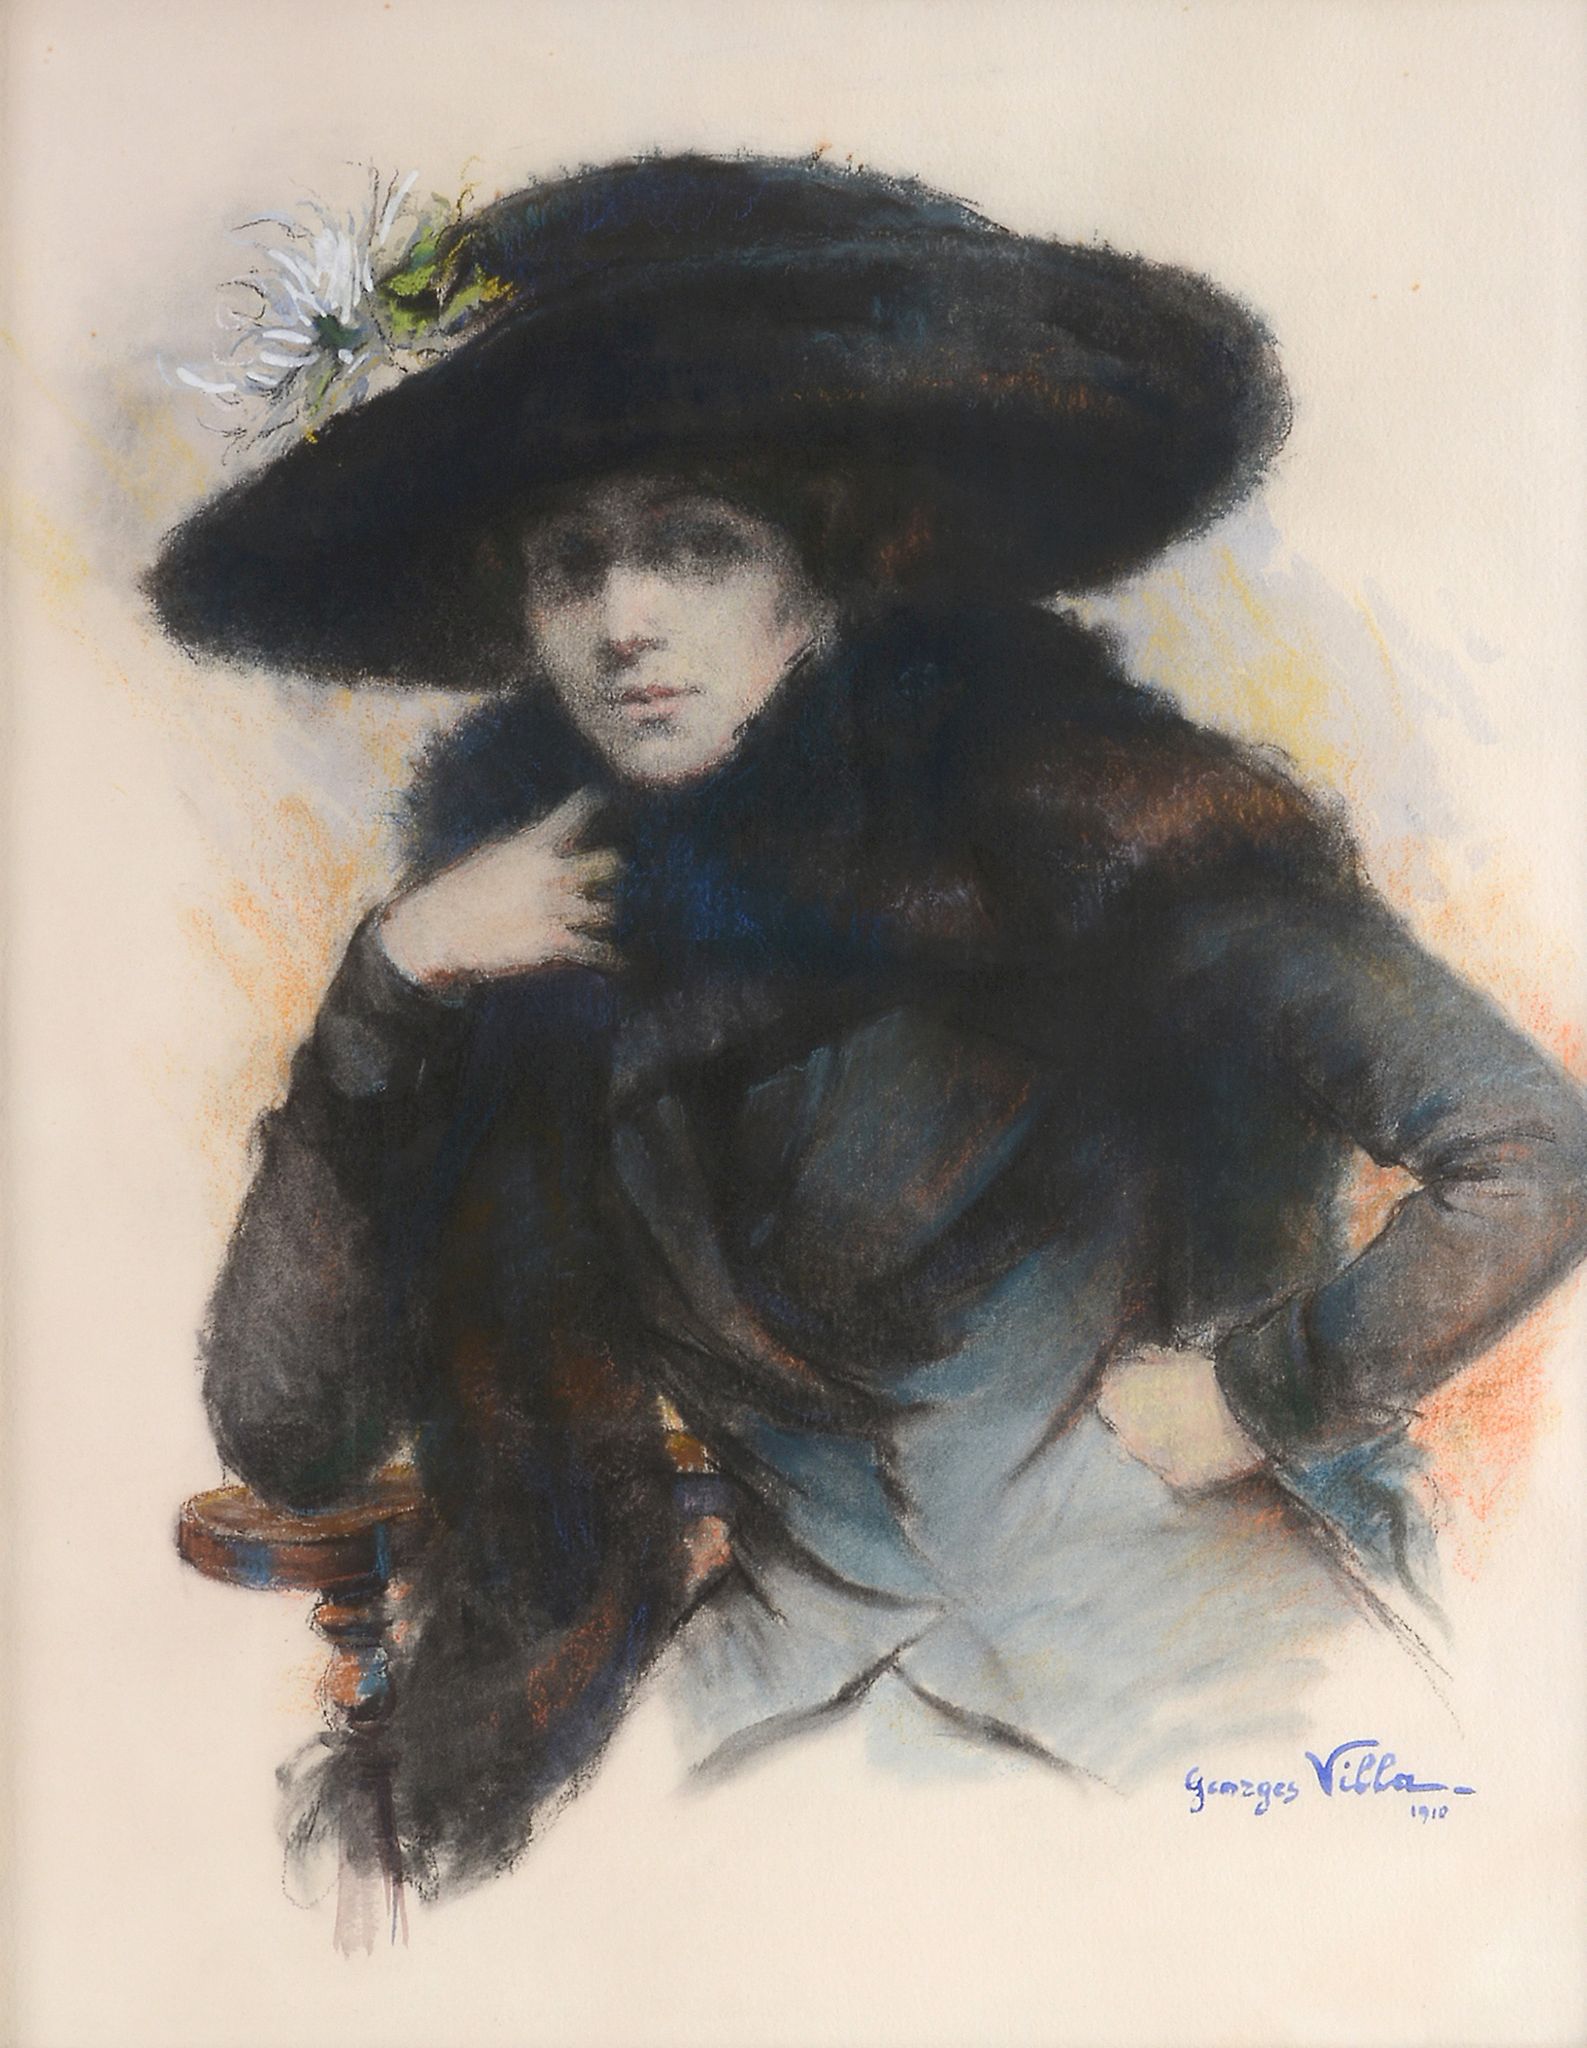 Georges Villa (1883-1965) - Portrait of Mademoiselle Germaine Lubin coloured pastel and watercolour,